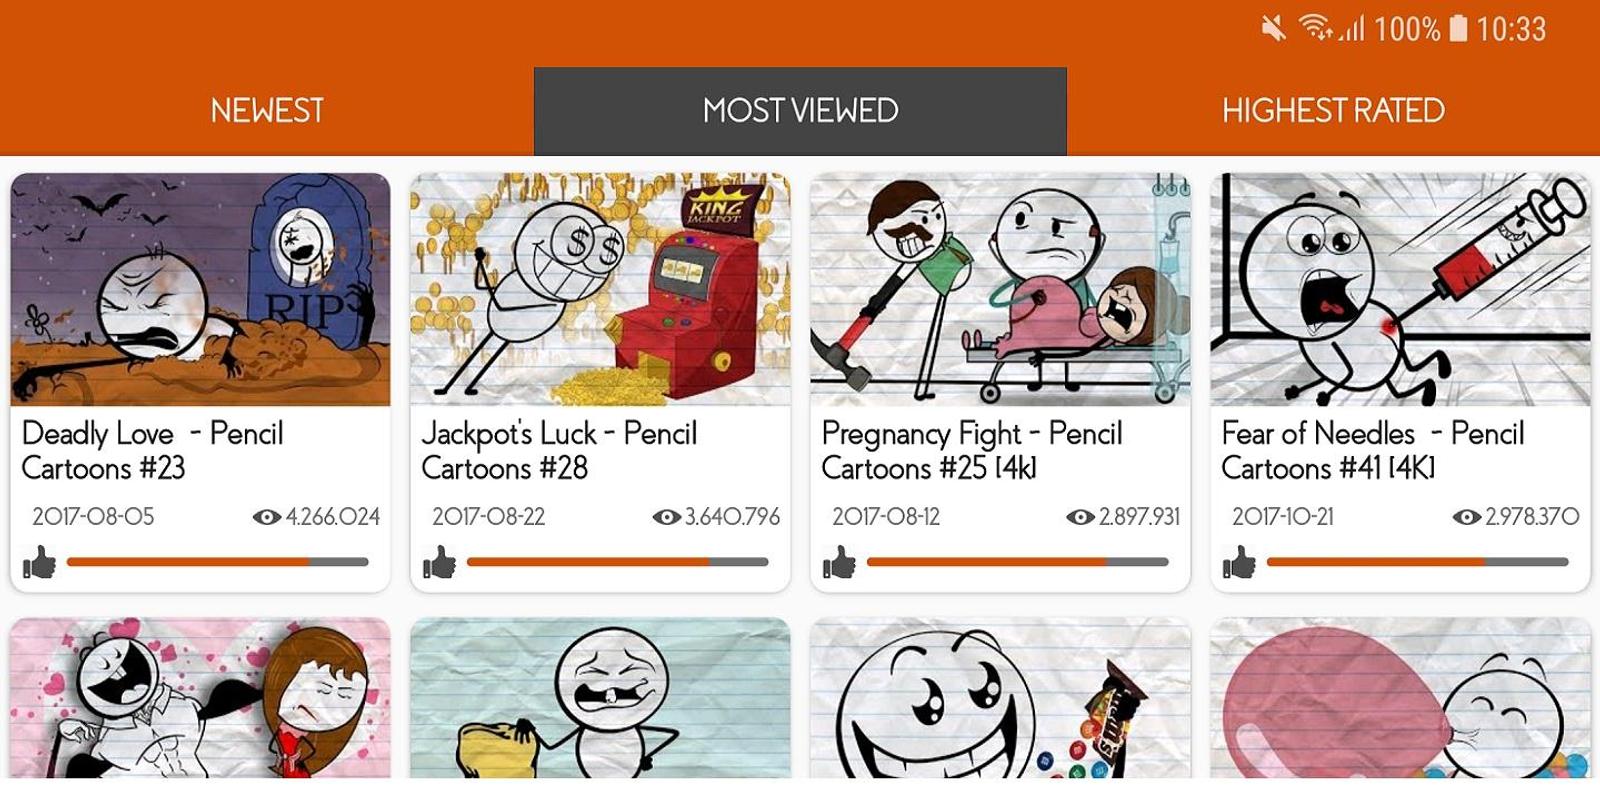 Video Of Pencil Cartoons For Android APK Download